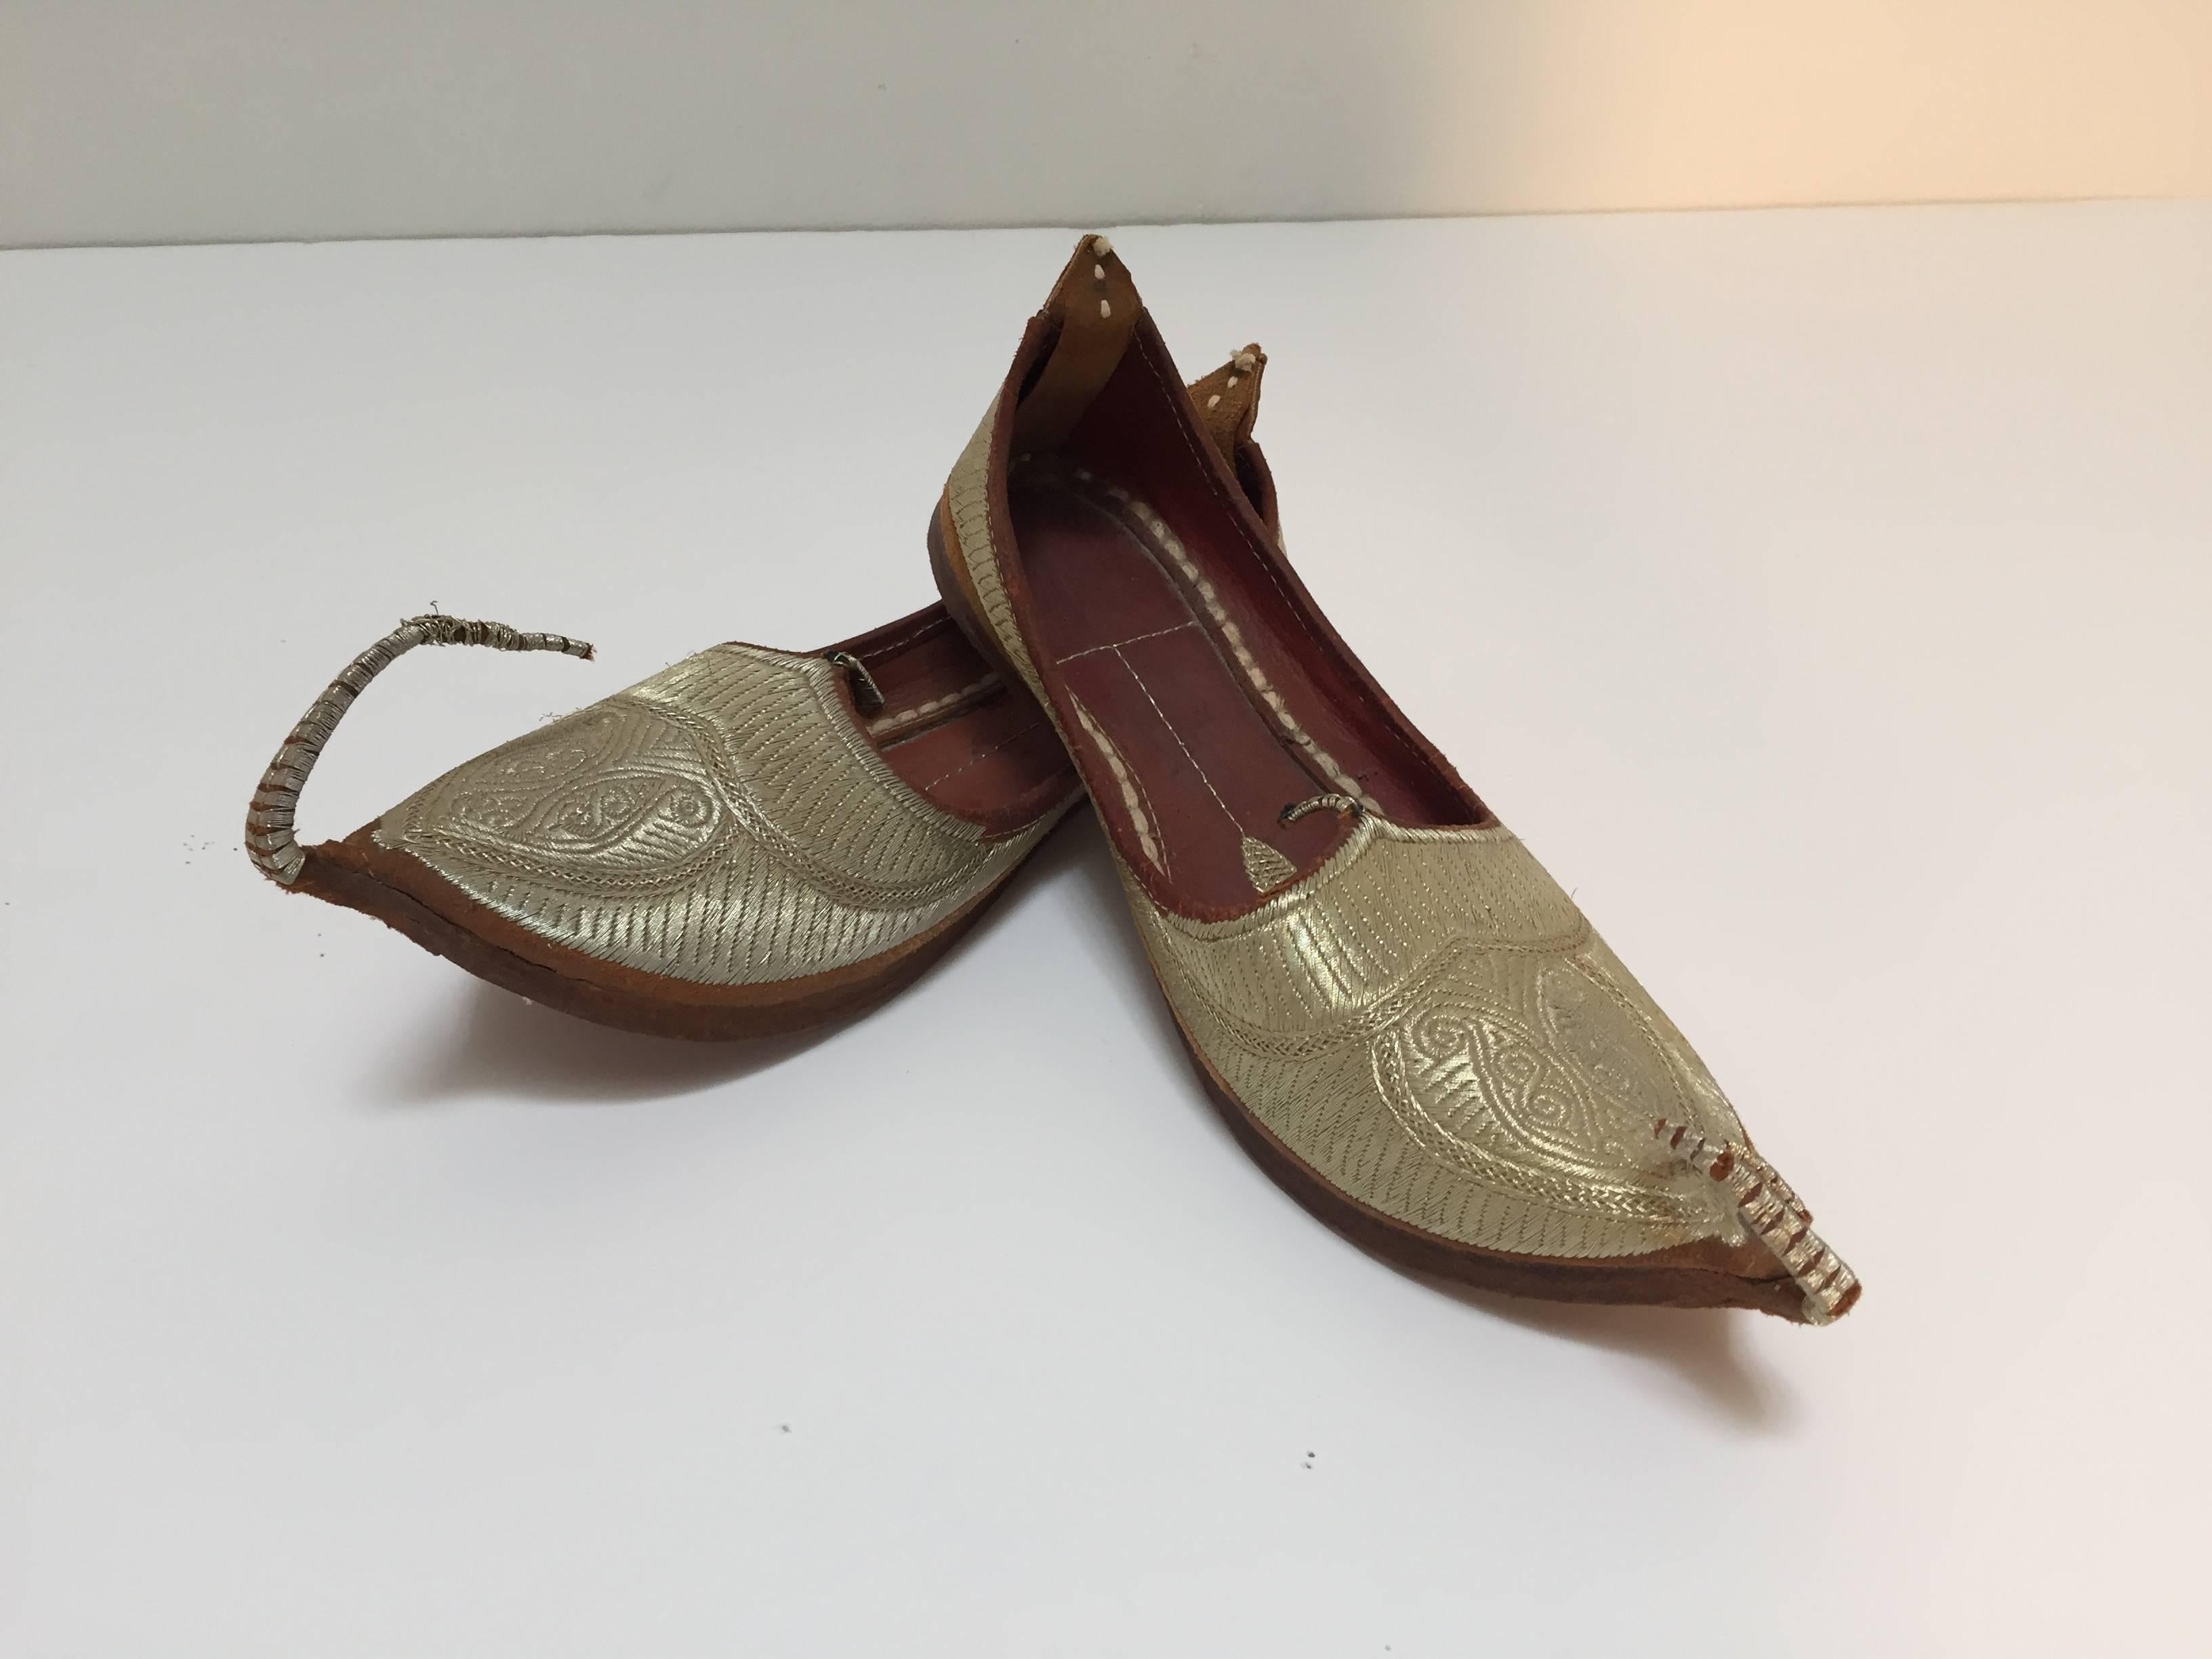 Amazing vintage Middle Eastern Moorish gold embroidered shoes.
Ceremonial wedding slippers, embroidered with gold thread. 
Aladdin, Ali Baba Arabic genie style with gold and leather sole and classic curled toe amazing to use as decorative objects or